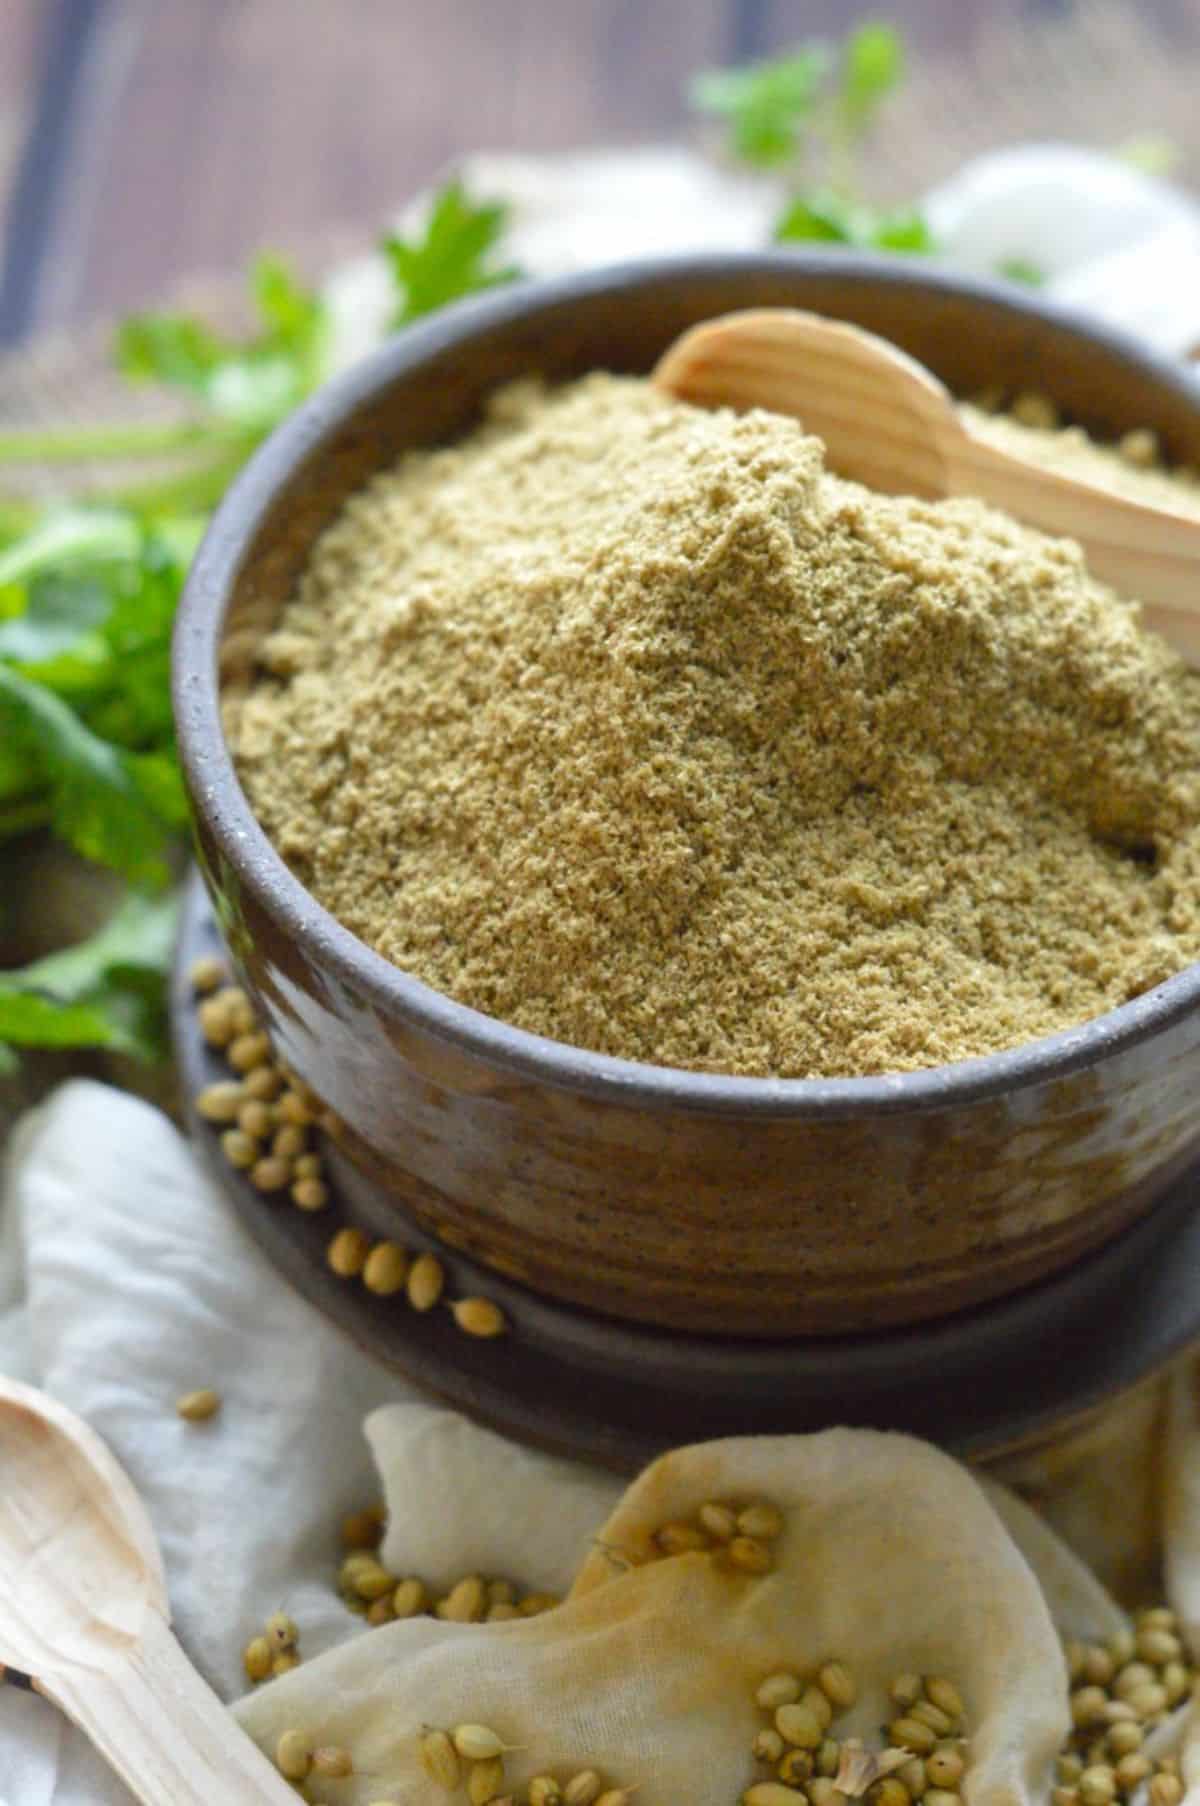 Coriander Powder in a brown bowl with a wooden spoon.